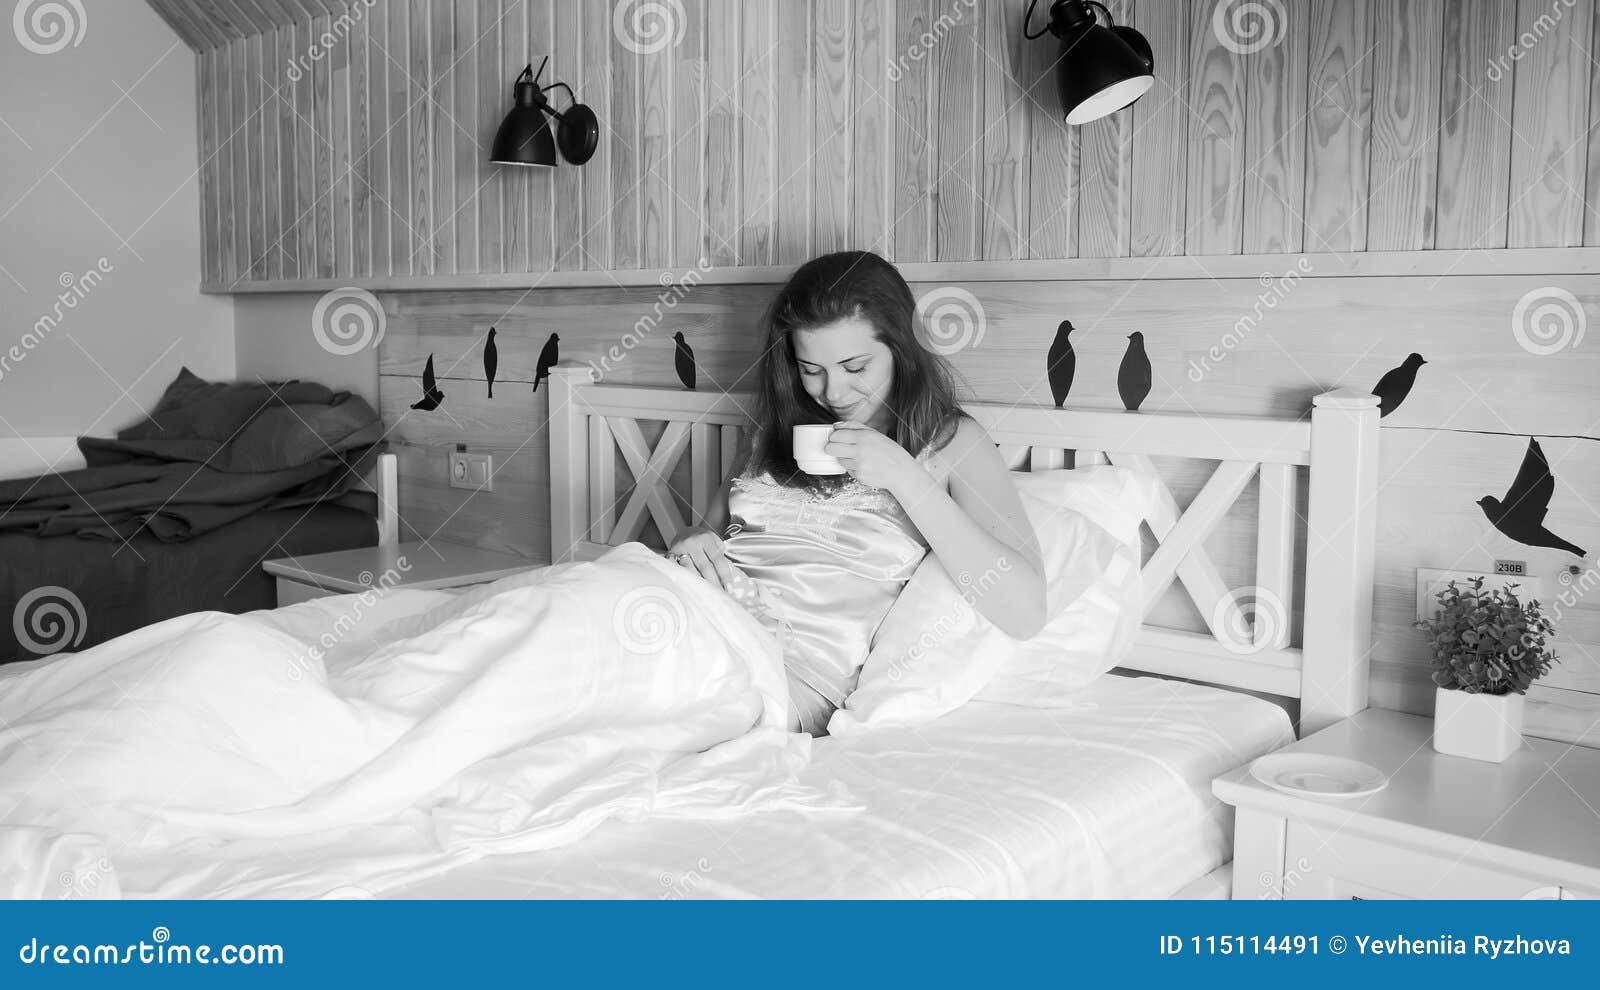 Black And White Image Of Young Woman Drinking Coffee In Bed At Morning Stock Image Image Of Lifestyle Comfortable 115114491